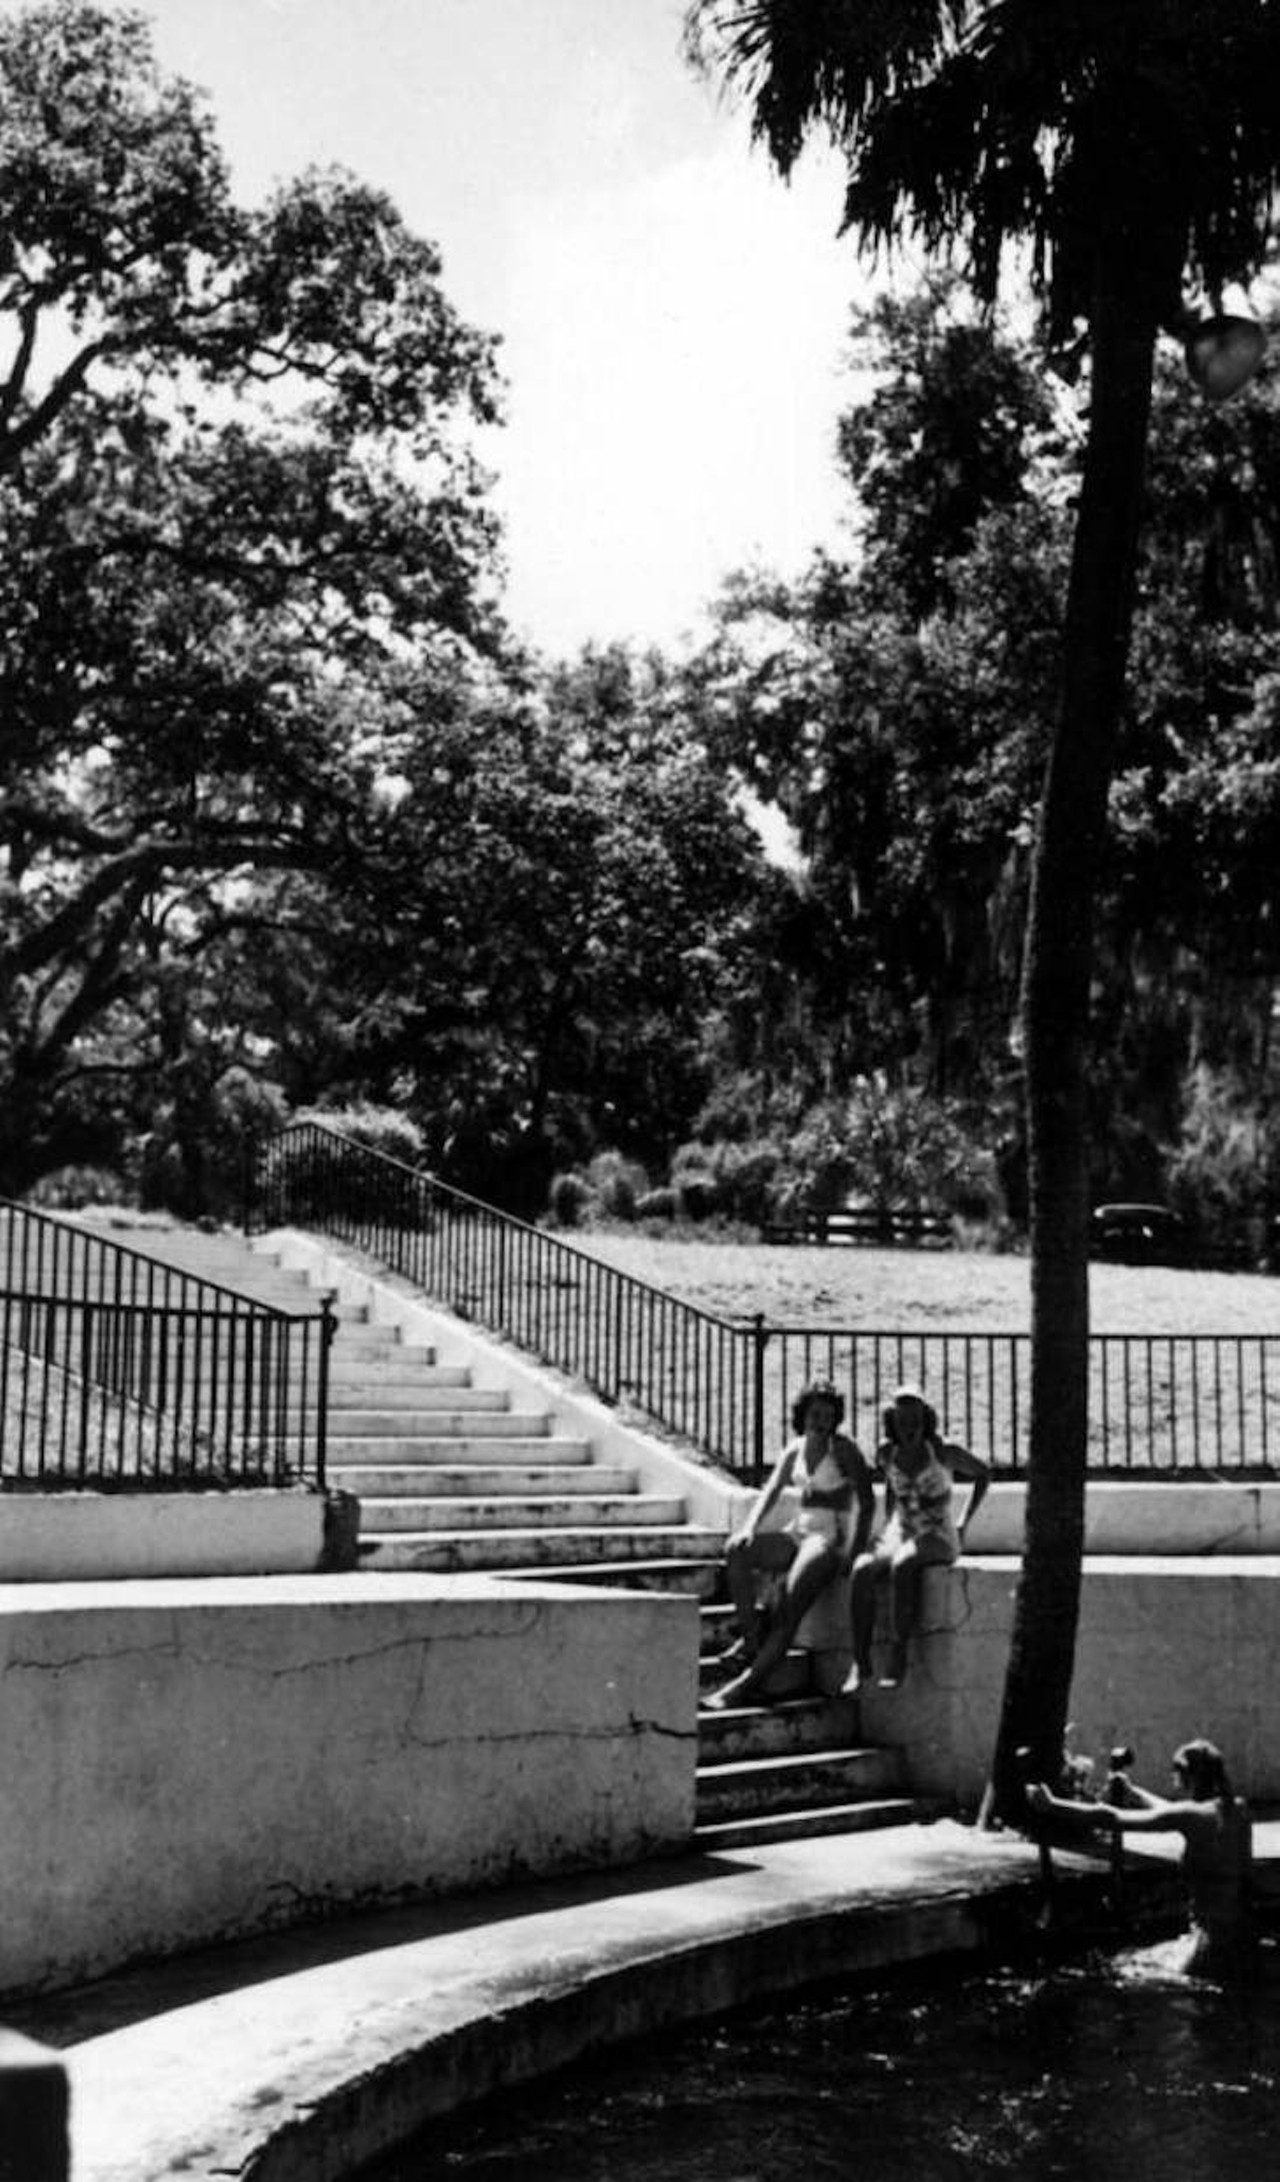 Visitors use stair to reach the springs, 1946.